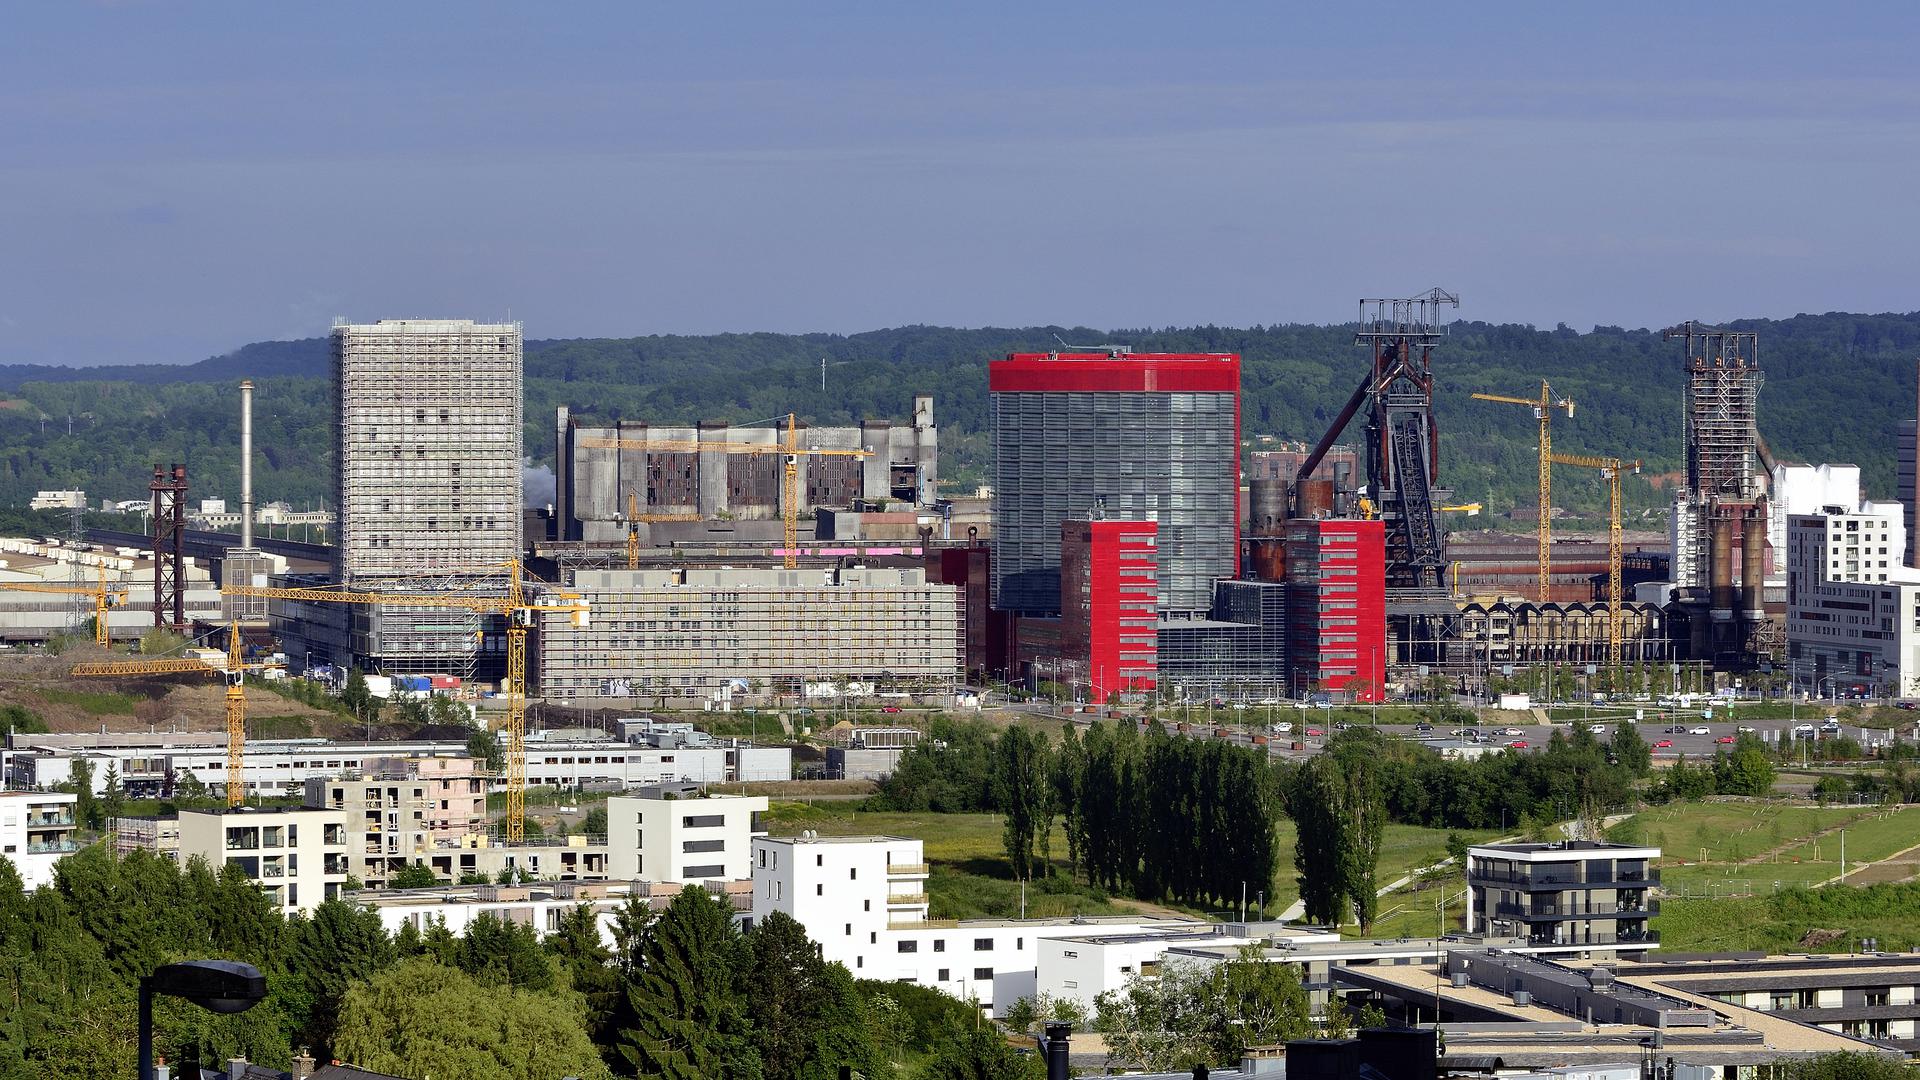 The Belval campus of the University of Luxembourg, which hosts research institutes and several SMEs